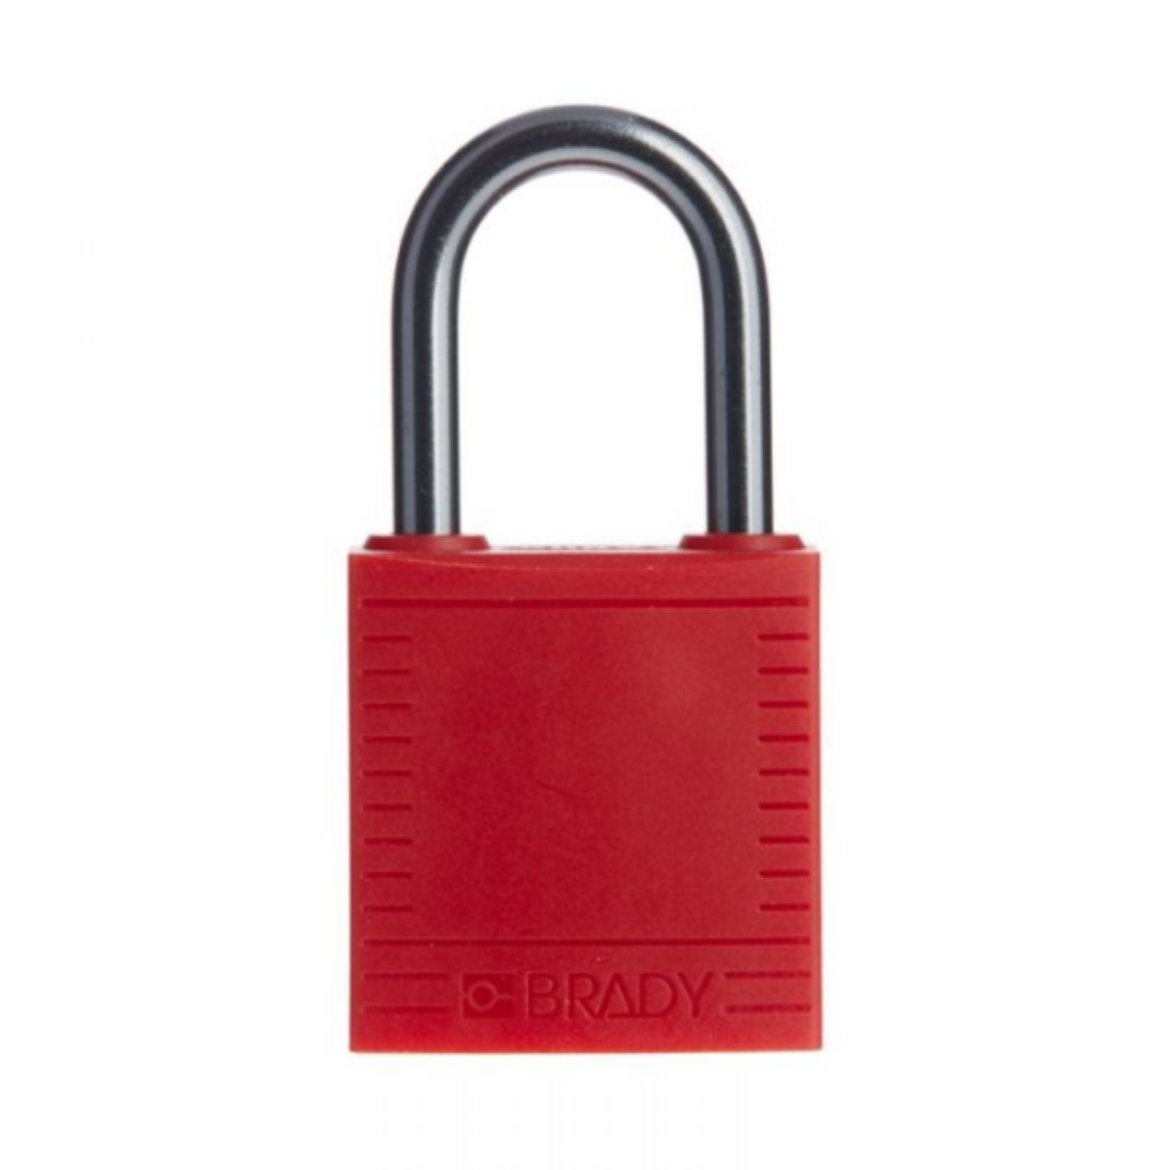 Picture of BRADY COMPACT LOCKOUT PADLOCK RED